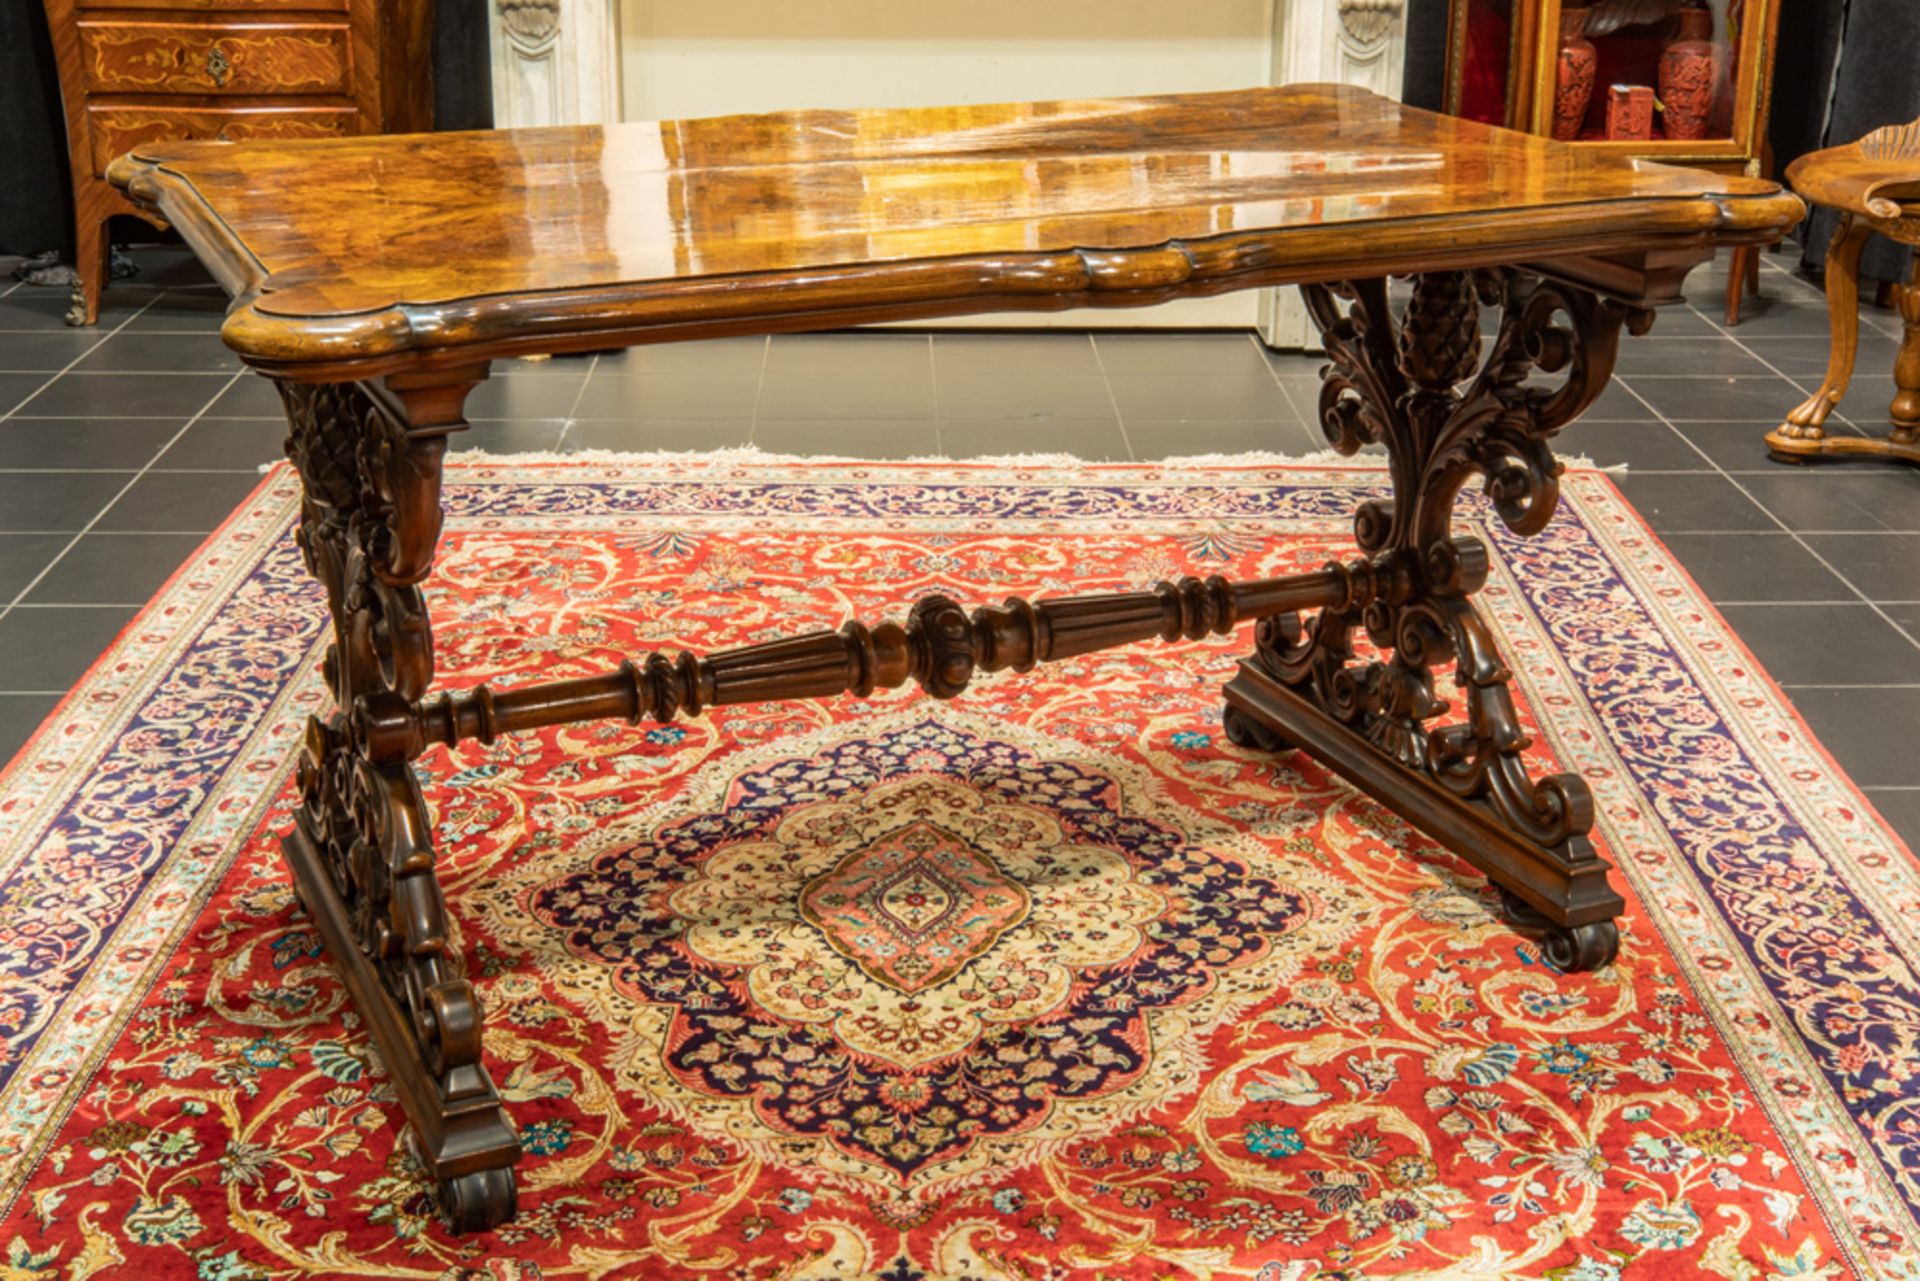 superb early 19th Cent., presumably English Regency period, table in burr and mahogany || Superbe